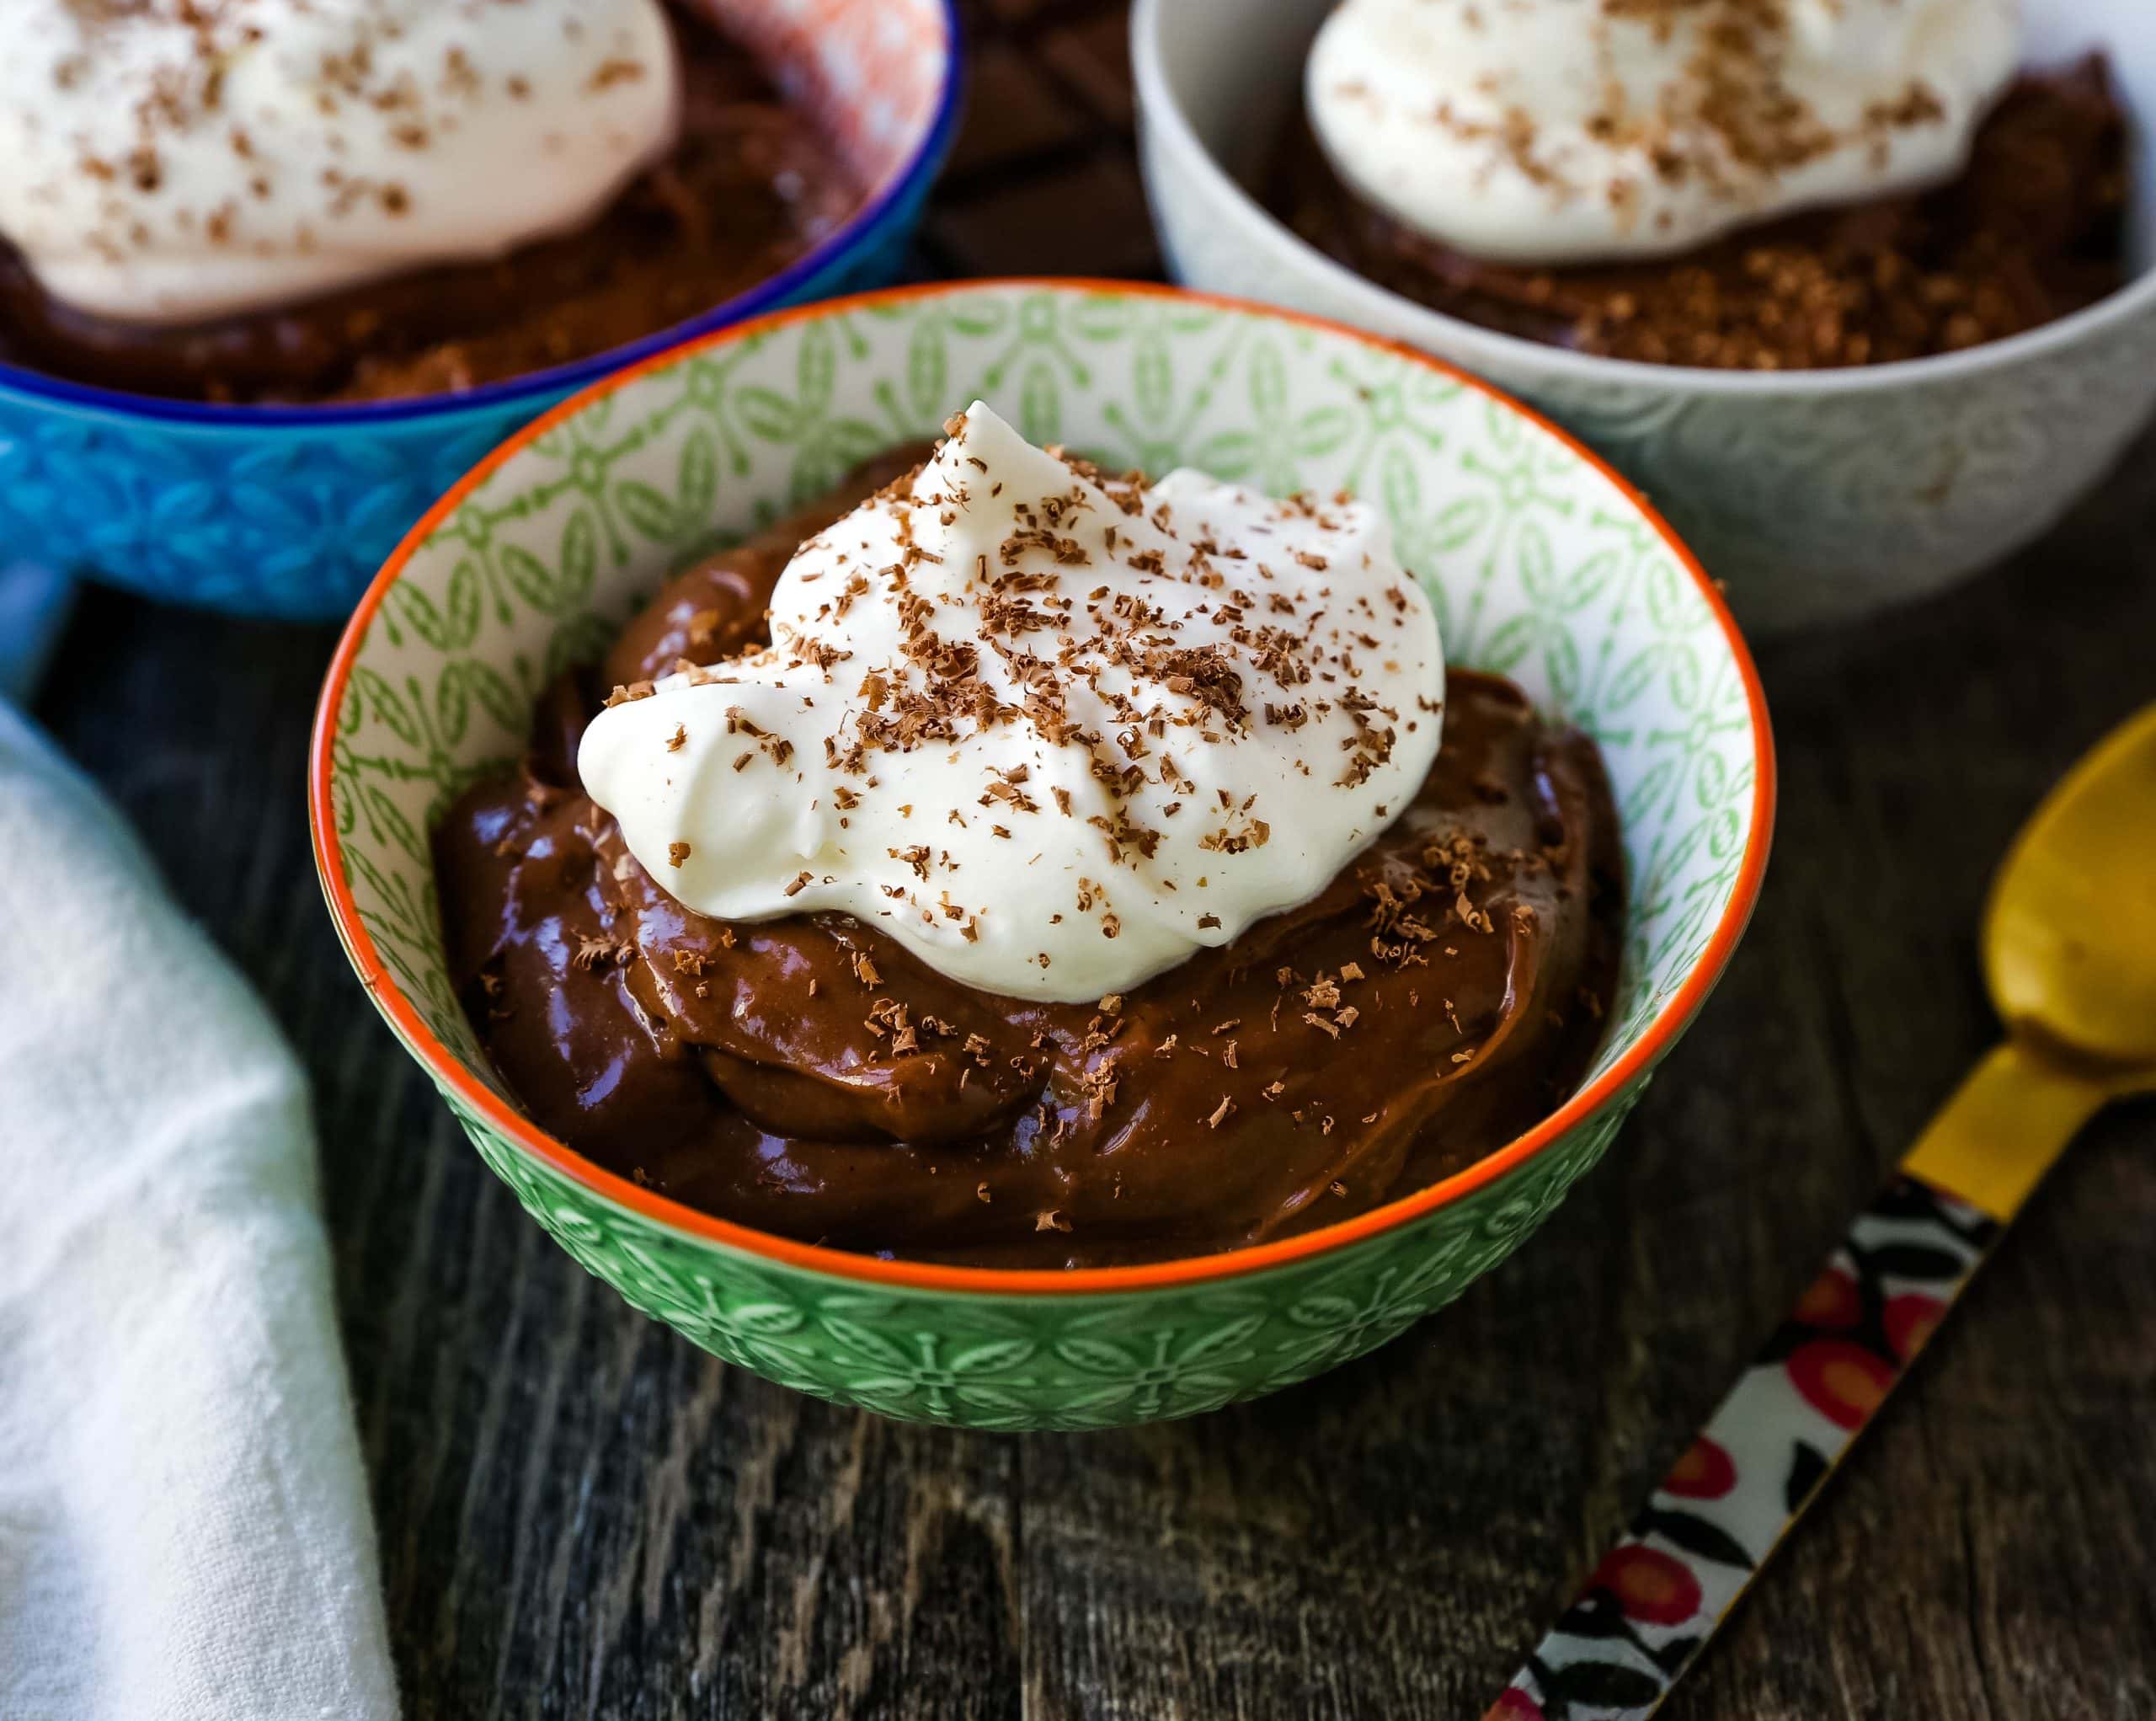 Chocolate Pudding Rich, decadent homemade chocolate pudding made with only 5 simple ingredients. The best chocolate pudding recipe! www.modernhoney.com #chocolate #chocolatepudding #pudding 